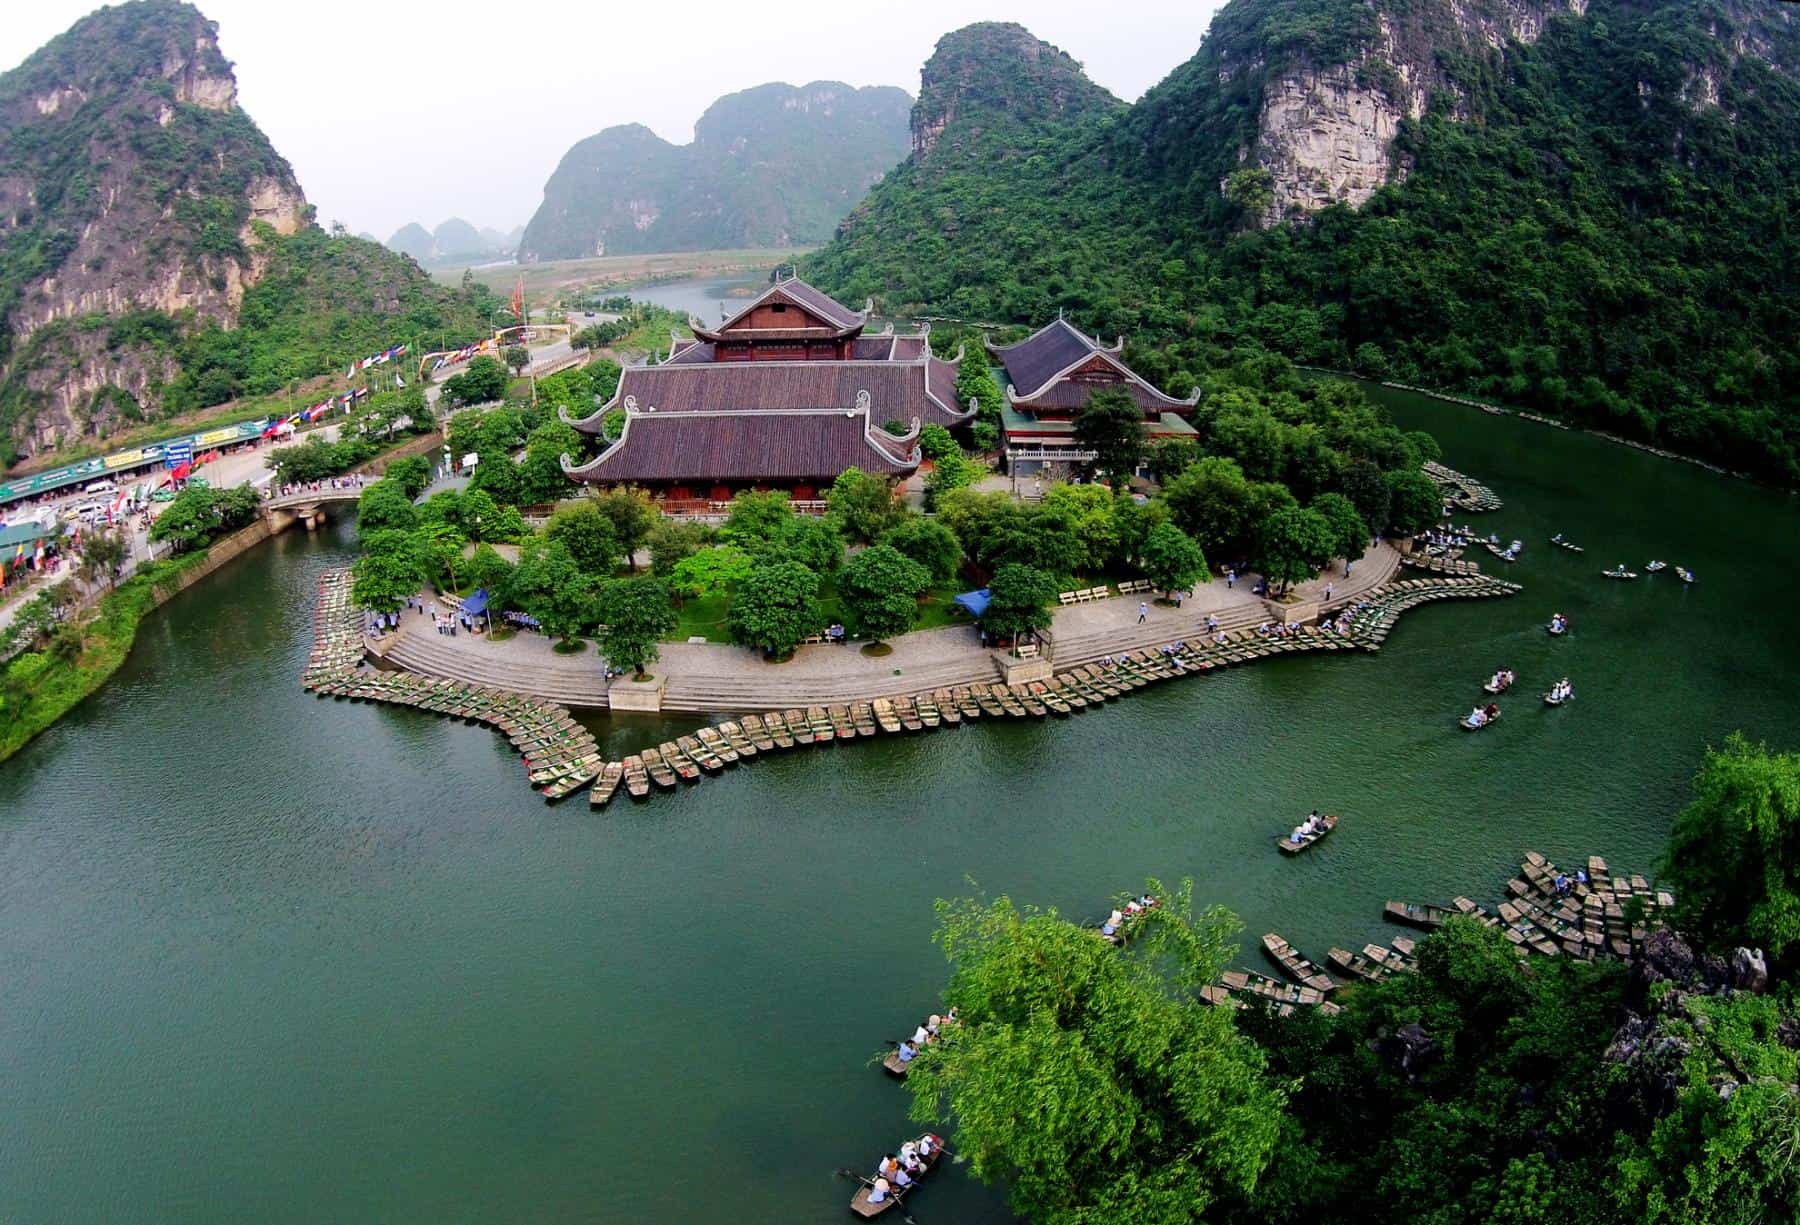 Trang An Complex - A Scenic Landscape in Ninh Binh from Hanoi (Photo)